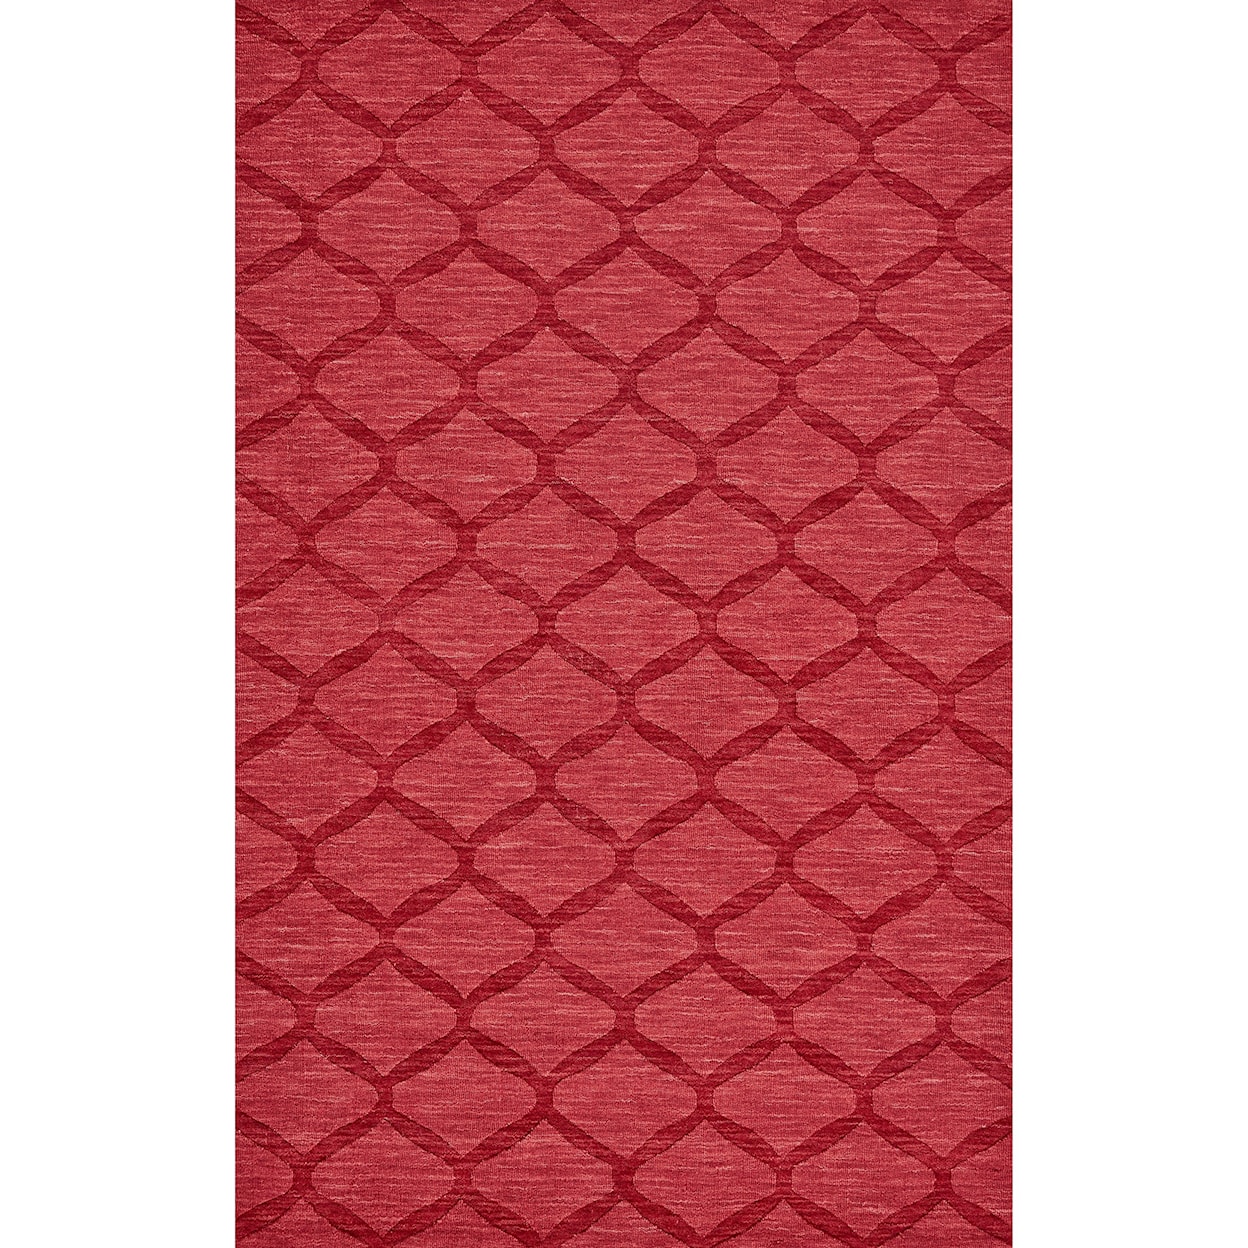 Feizy Rugs Soma Red 5' x 8' Area Rug